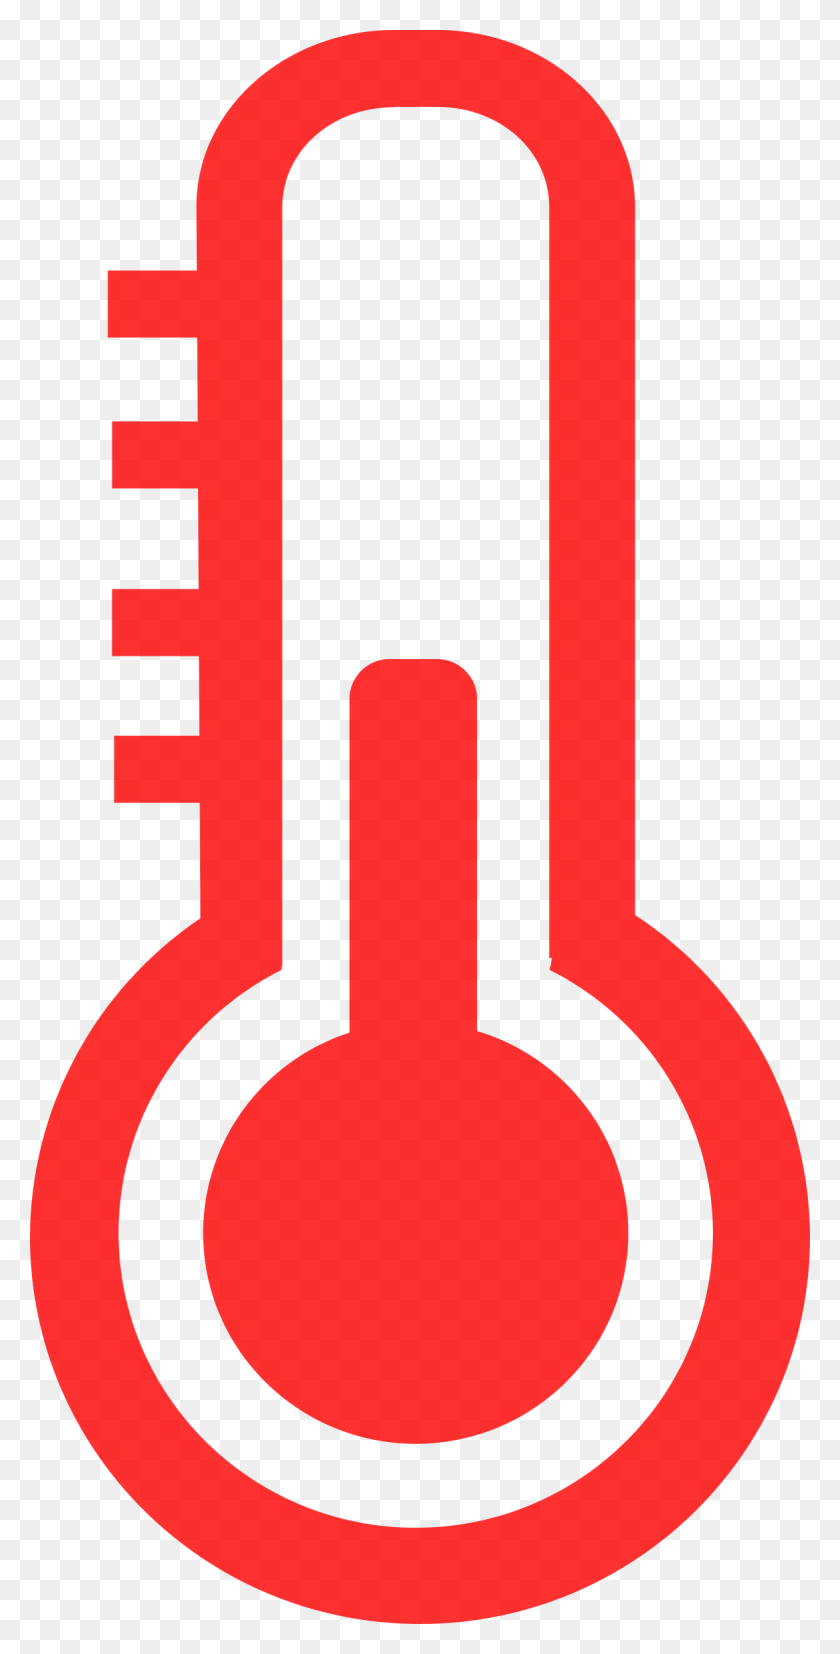 1174x2400 Collection Of Free Cantoon Clipart Thermometer Download On Ubisafe - Thermometer Clipart Black And White